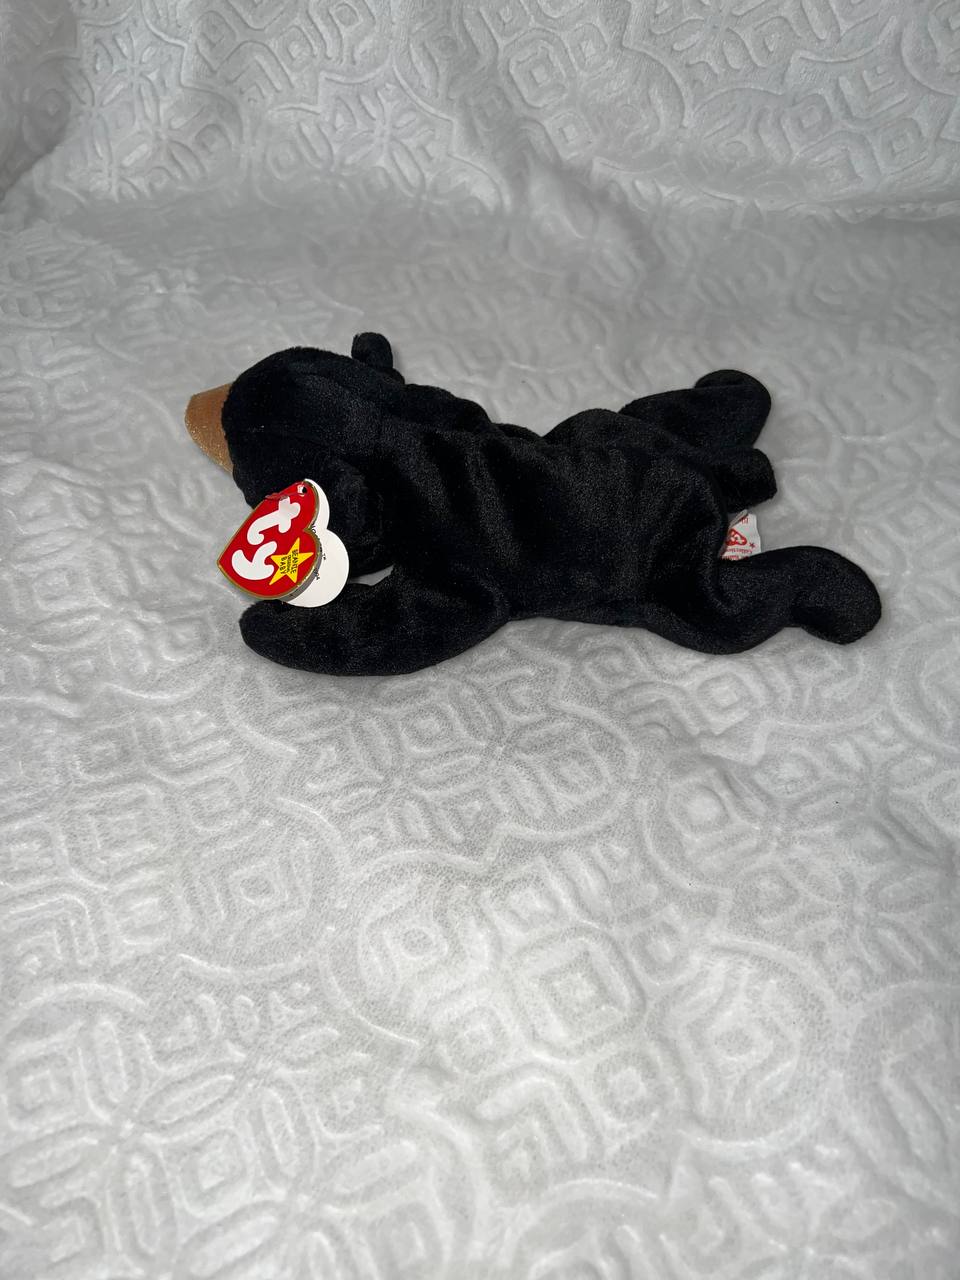 *RARE* MINT Blackie Beanie Baby 1994 With Tag